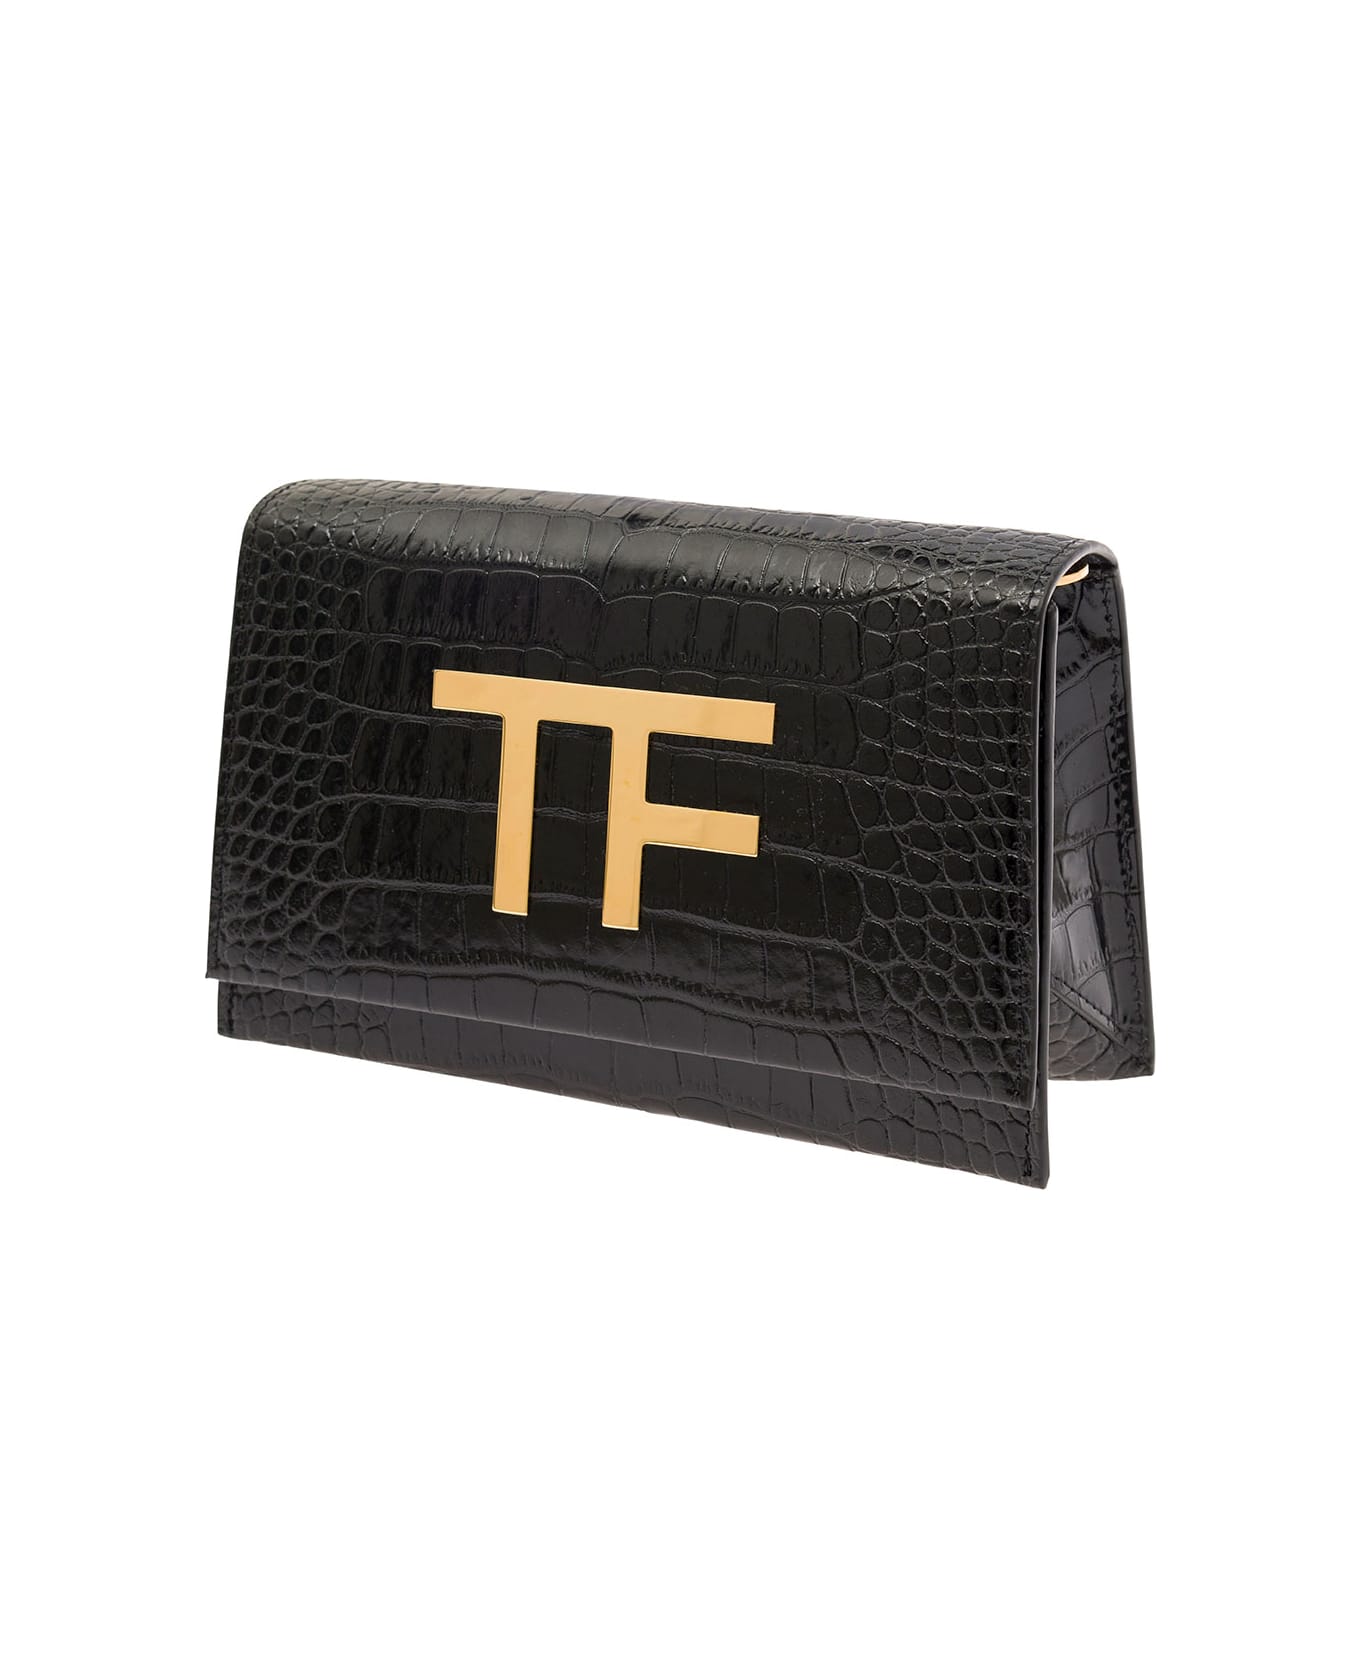 Tom Ford Black Shoulder Bag With Tf Logo Detail In Coco Leather Woman - Black ショルダーバッグ